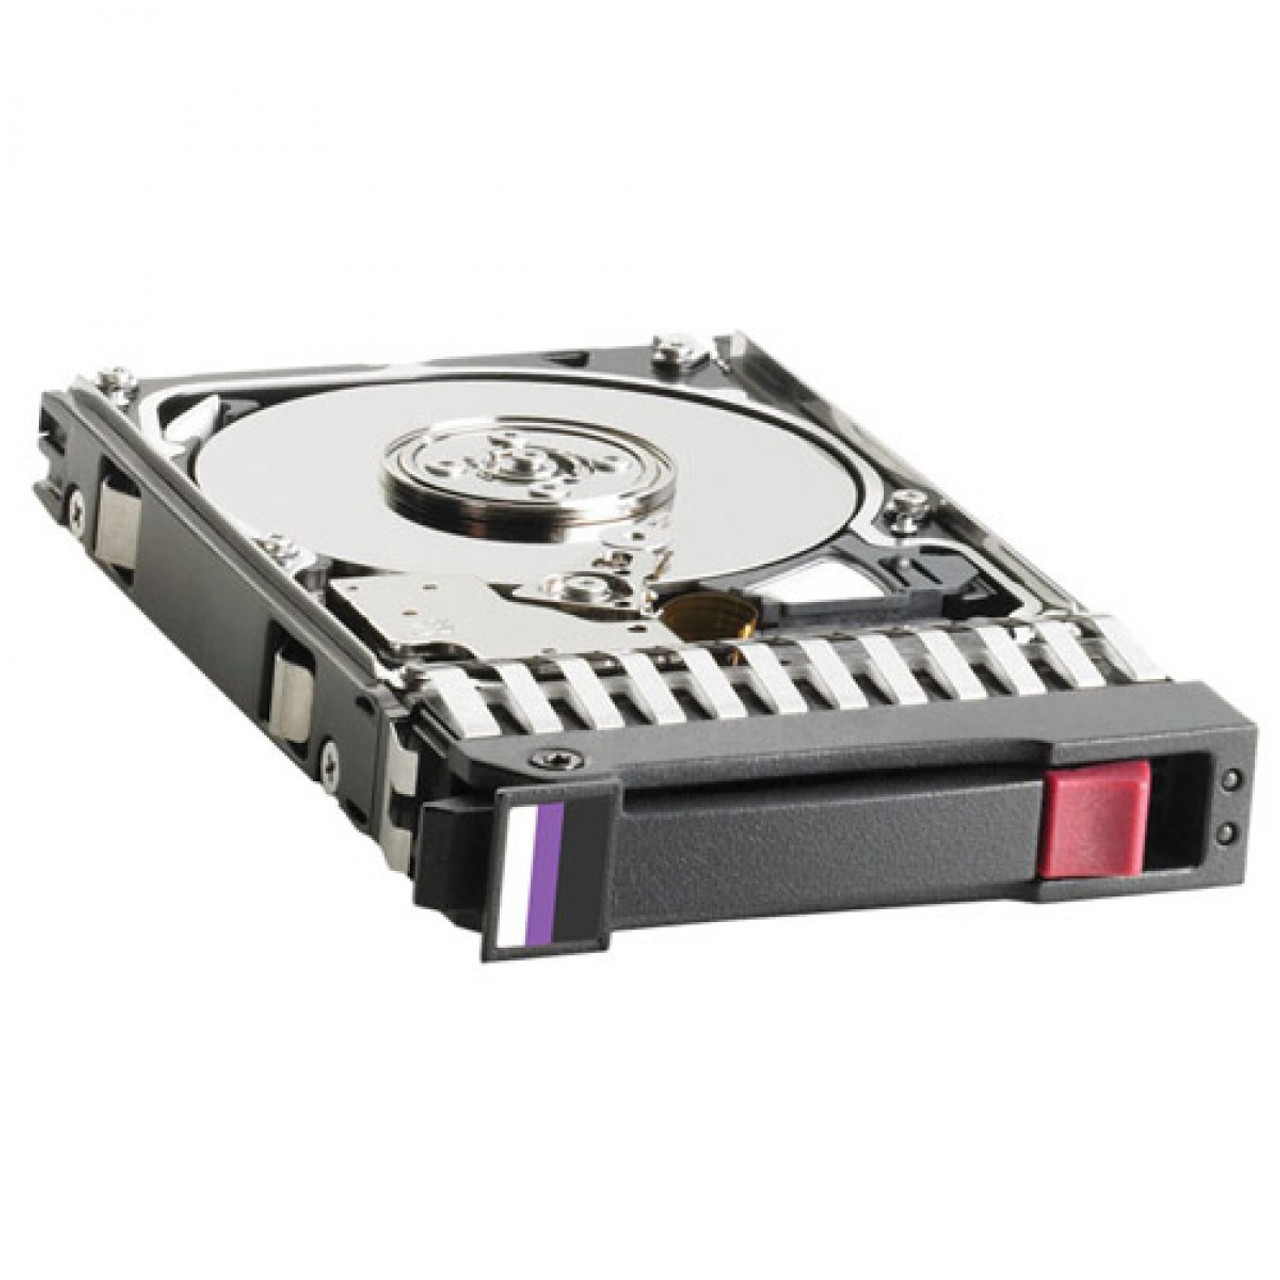 74Y4290 - IBM 900GB 10000RPM SAS 6GB/s 2.5-inch SFF Hot-pluggable Hard Drive with Tray